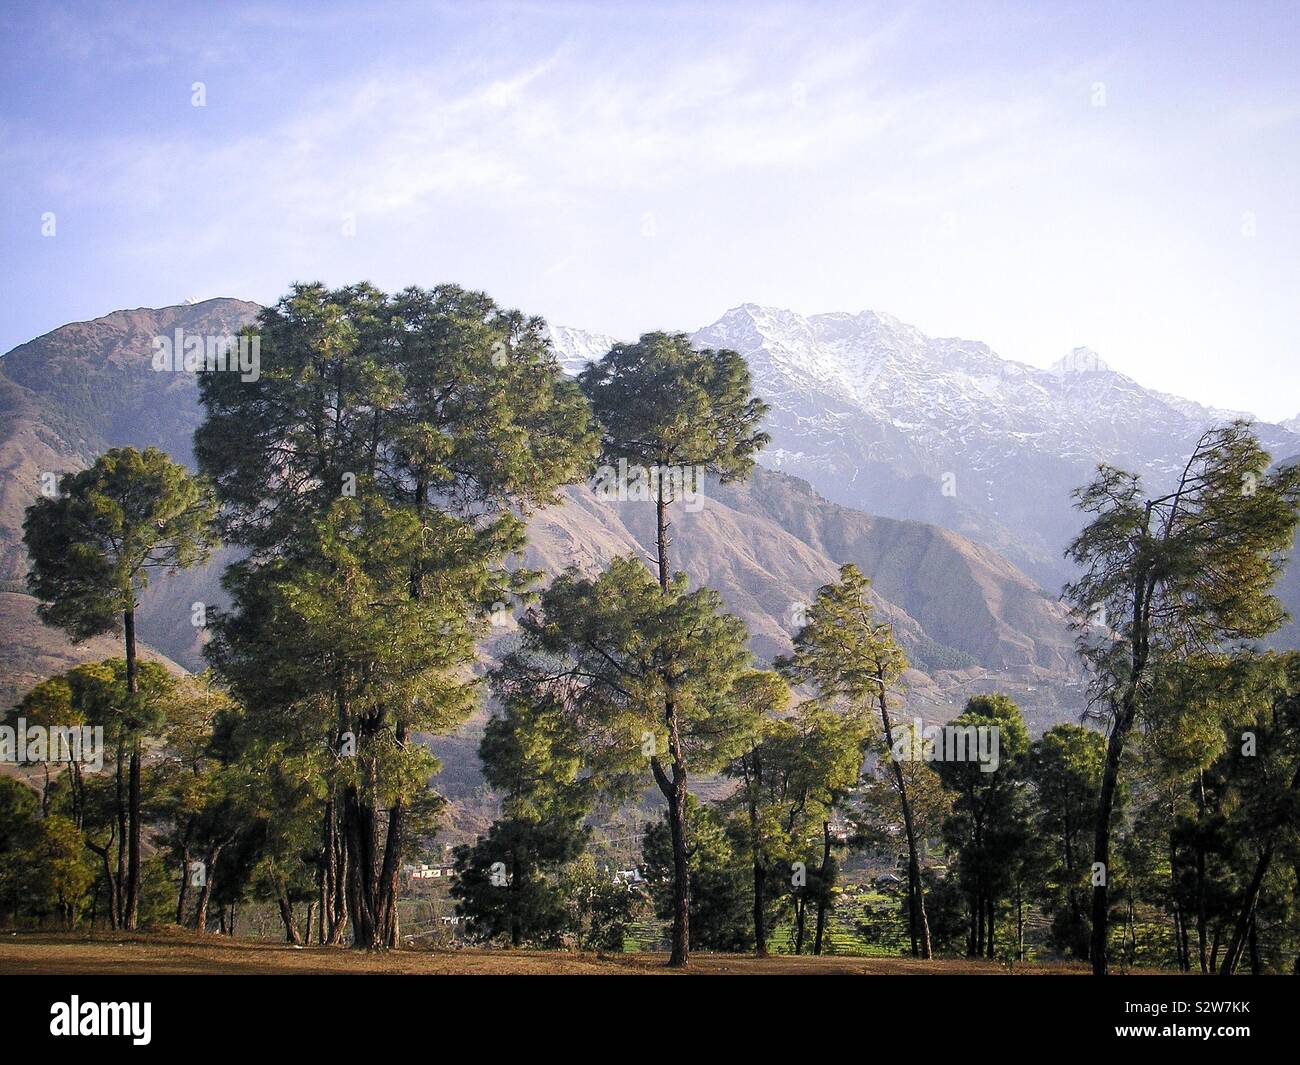 Scenic landscape beside a country road in the Dauladhar mountains of the Himalayan foothills, near Dharamsala, Himachal Pradesh, north India Stock Photo